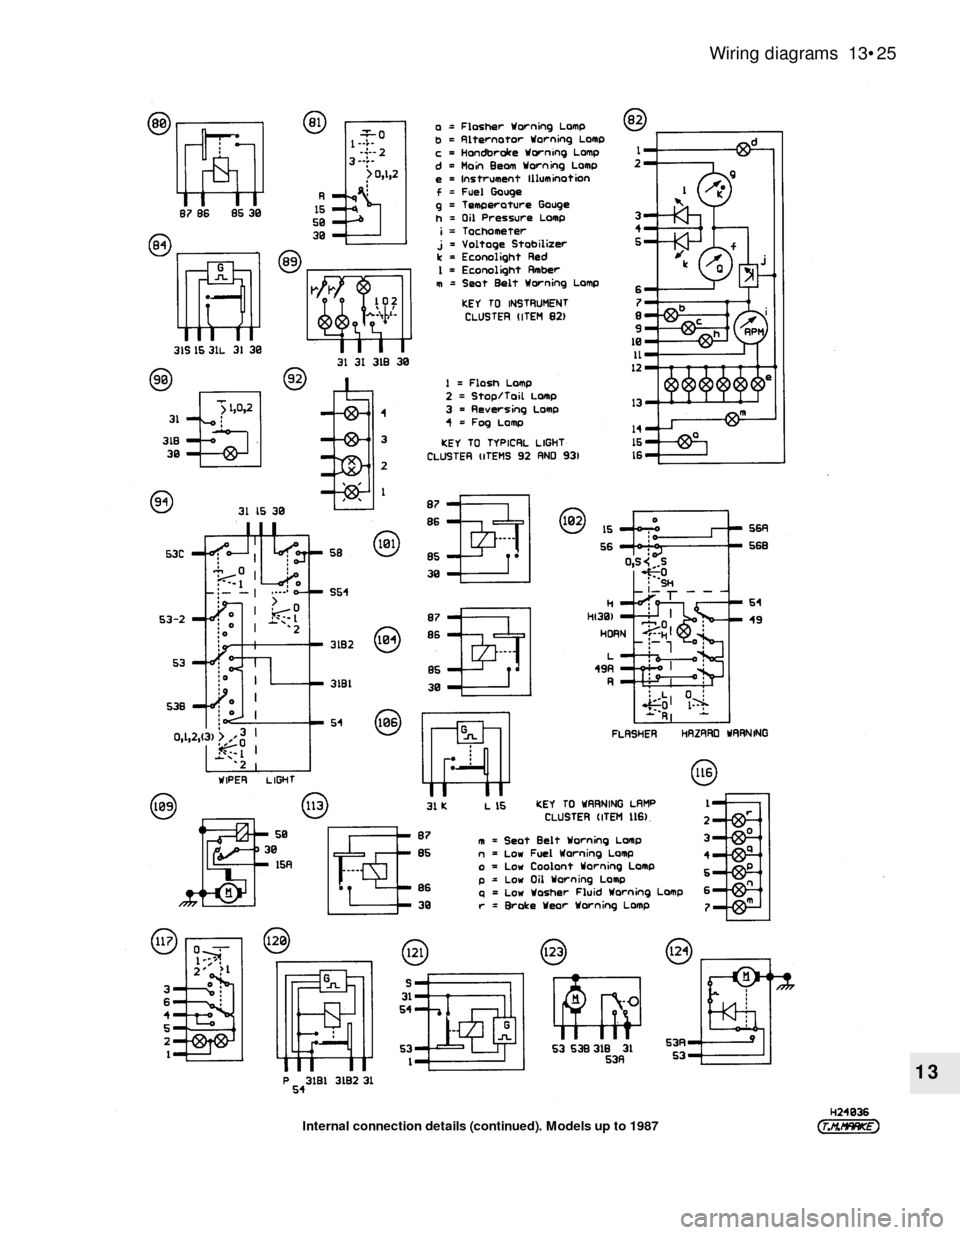 FORD SIERRA 1989 2.G Body Electrical System Workshop Manual Wiring diagrams  13•25
13
Internal connection details (continued). Models up to 1987 